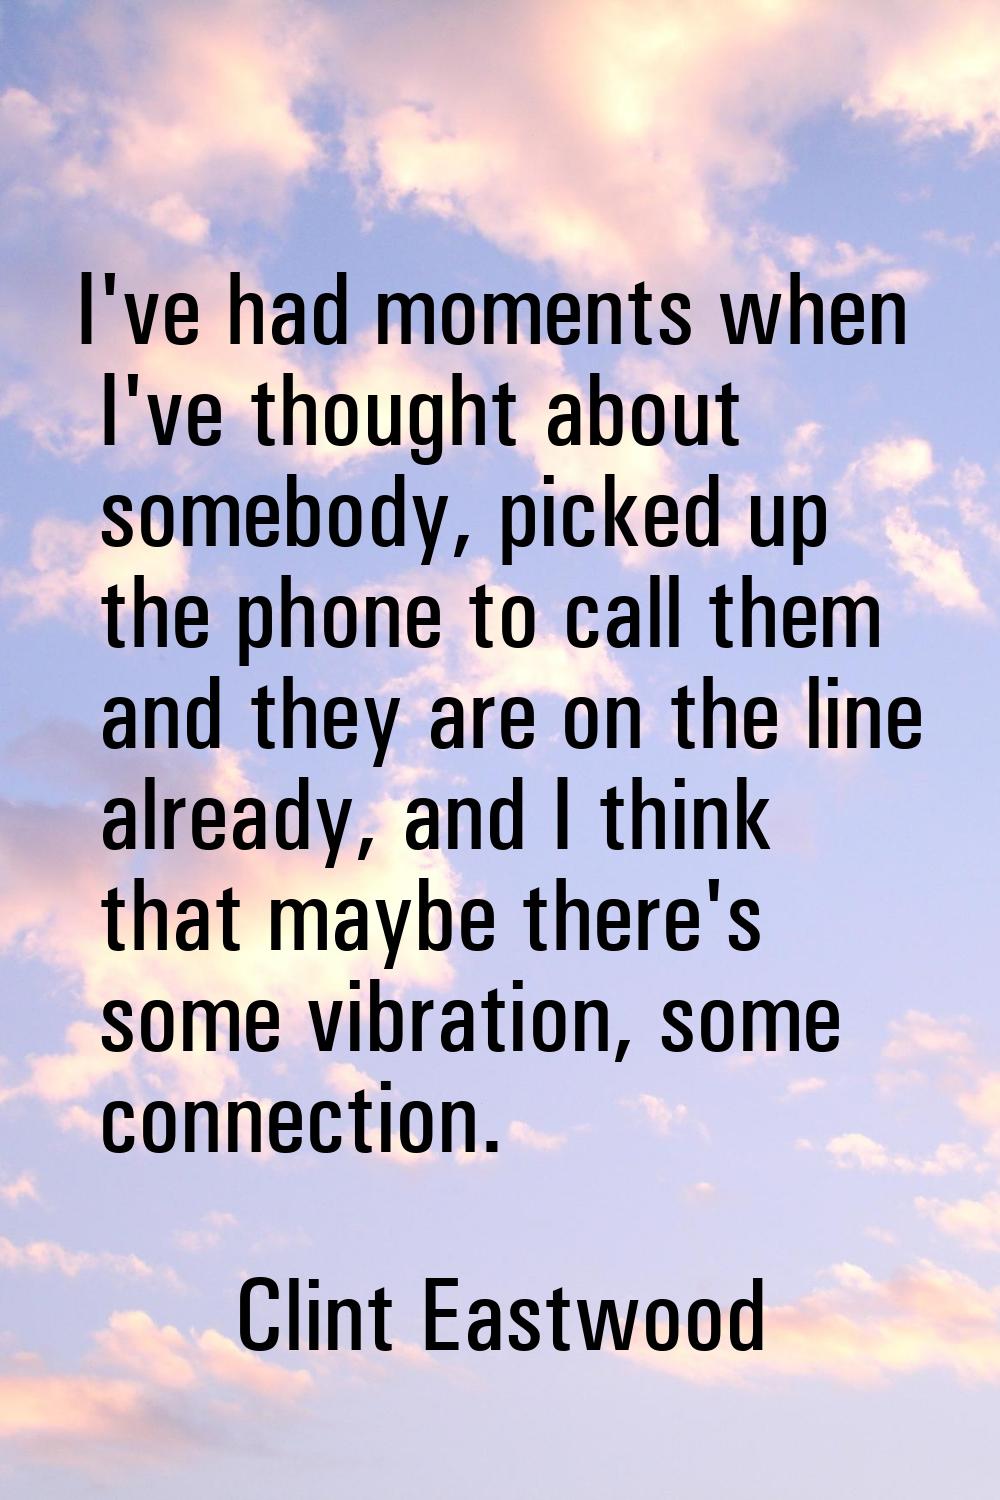 I've had moments when I've thought about somebody, picked up the phone to call them and they are on